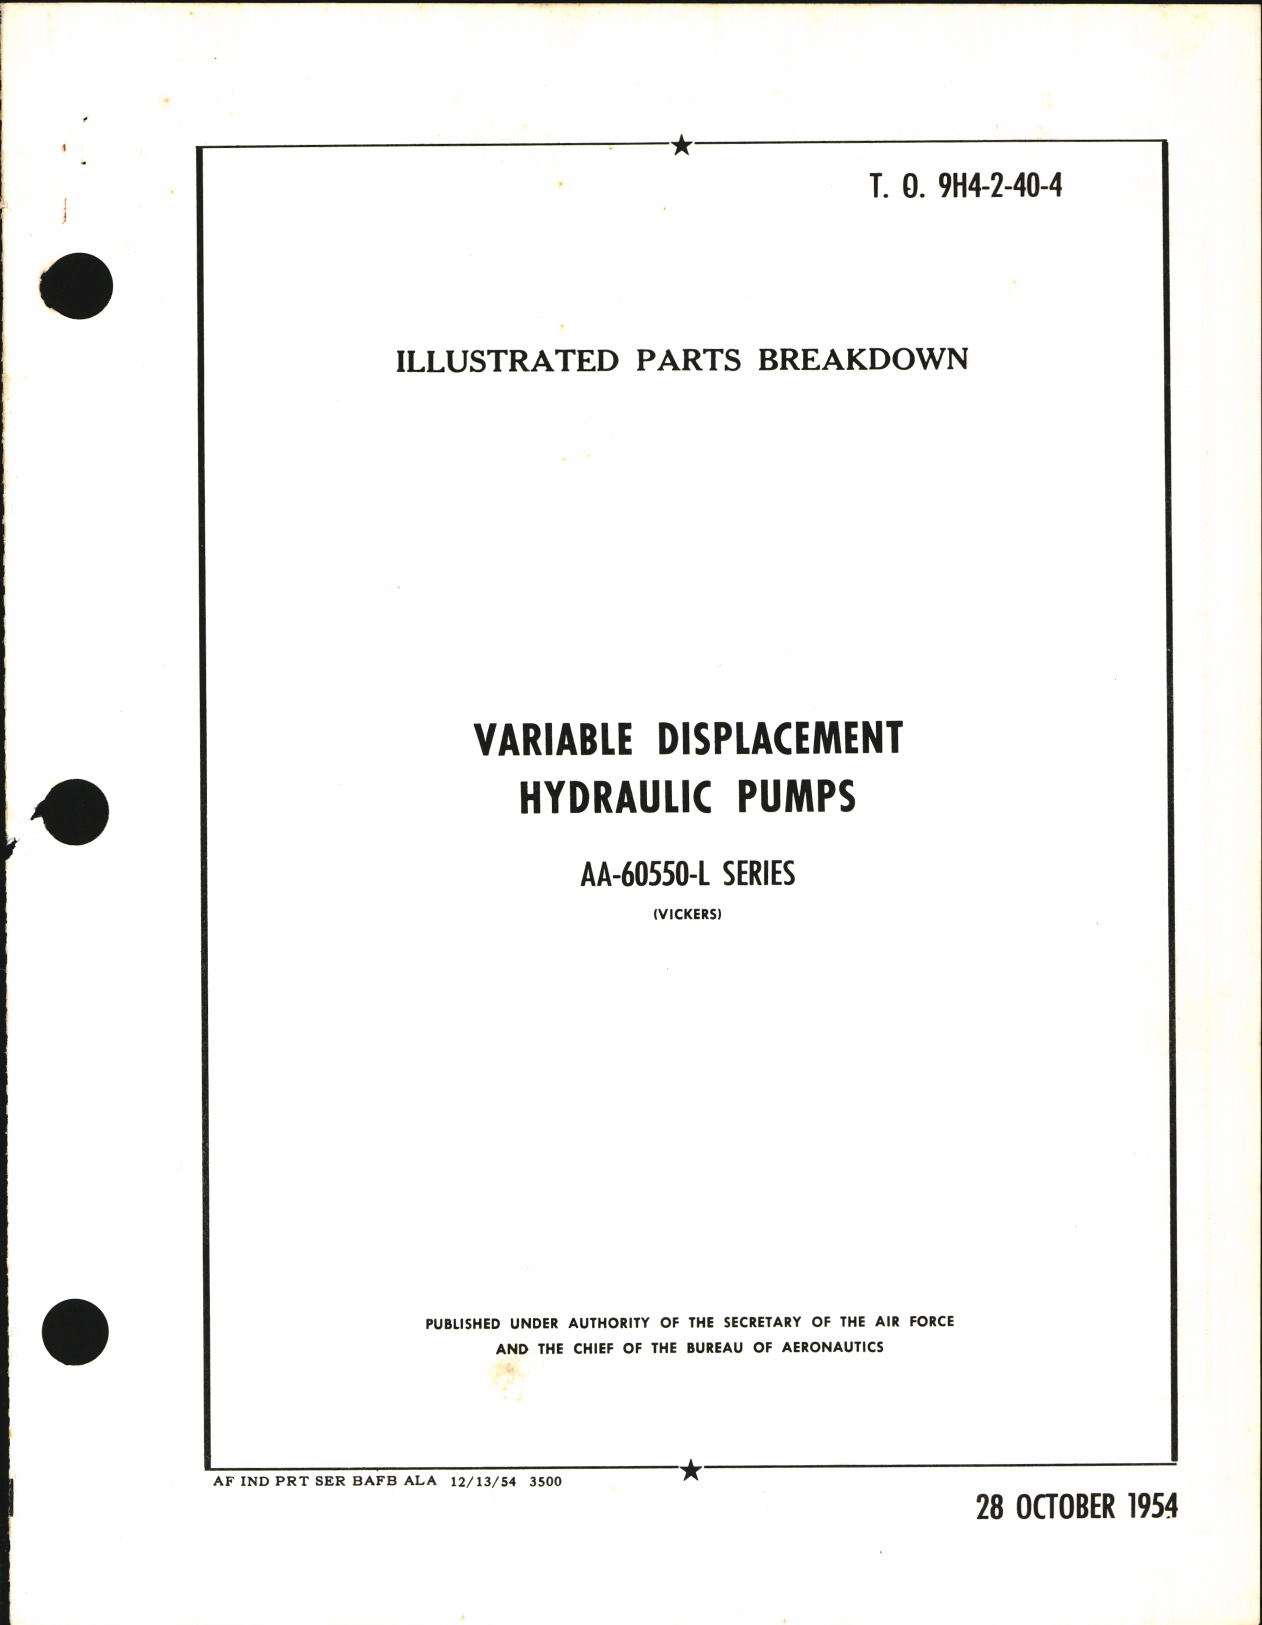 Sample page 1 from AirCorps Library document: Illustrated Parts Breakdown for Variable Displacement Hydraulic Pumps AA-60550-L Series